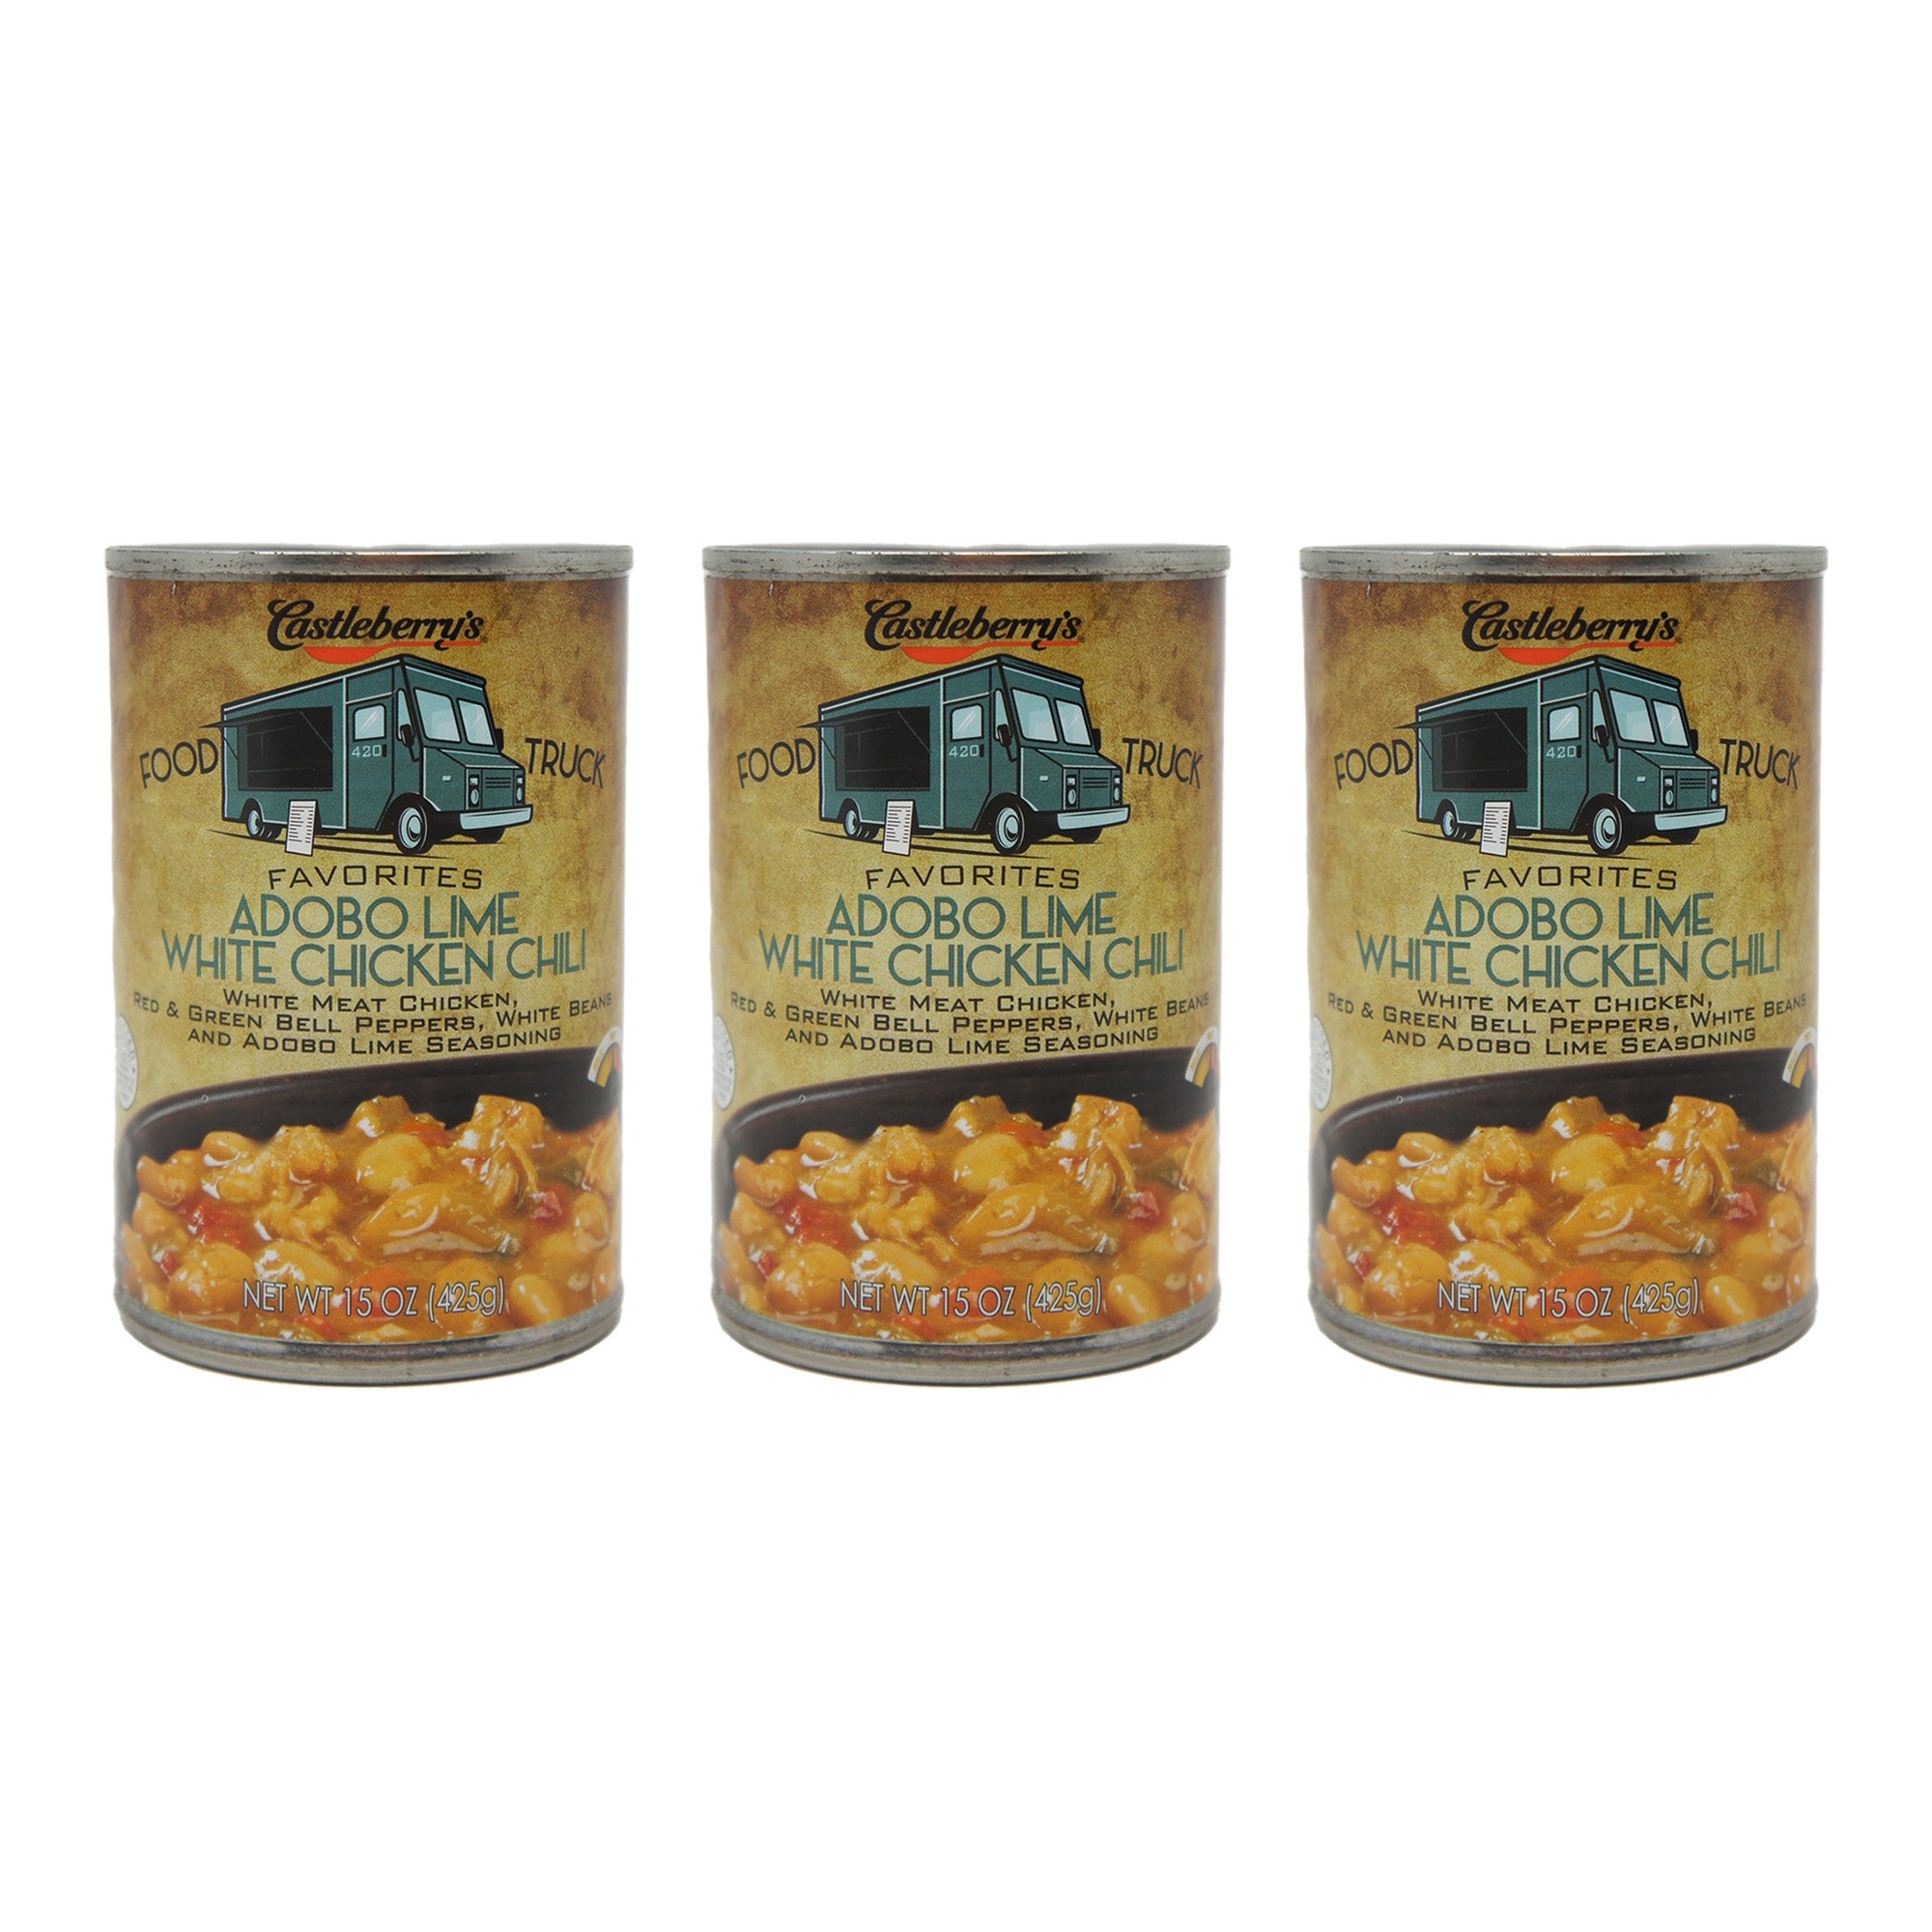 Castleberry's Food Truck Favorites, Abodo Lime White Chicken Chili, 15 oz Cans (3 Pack)